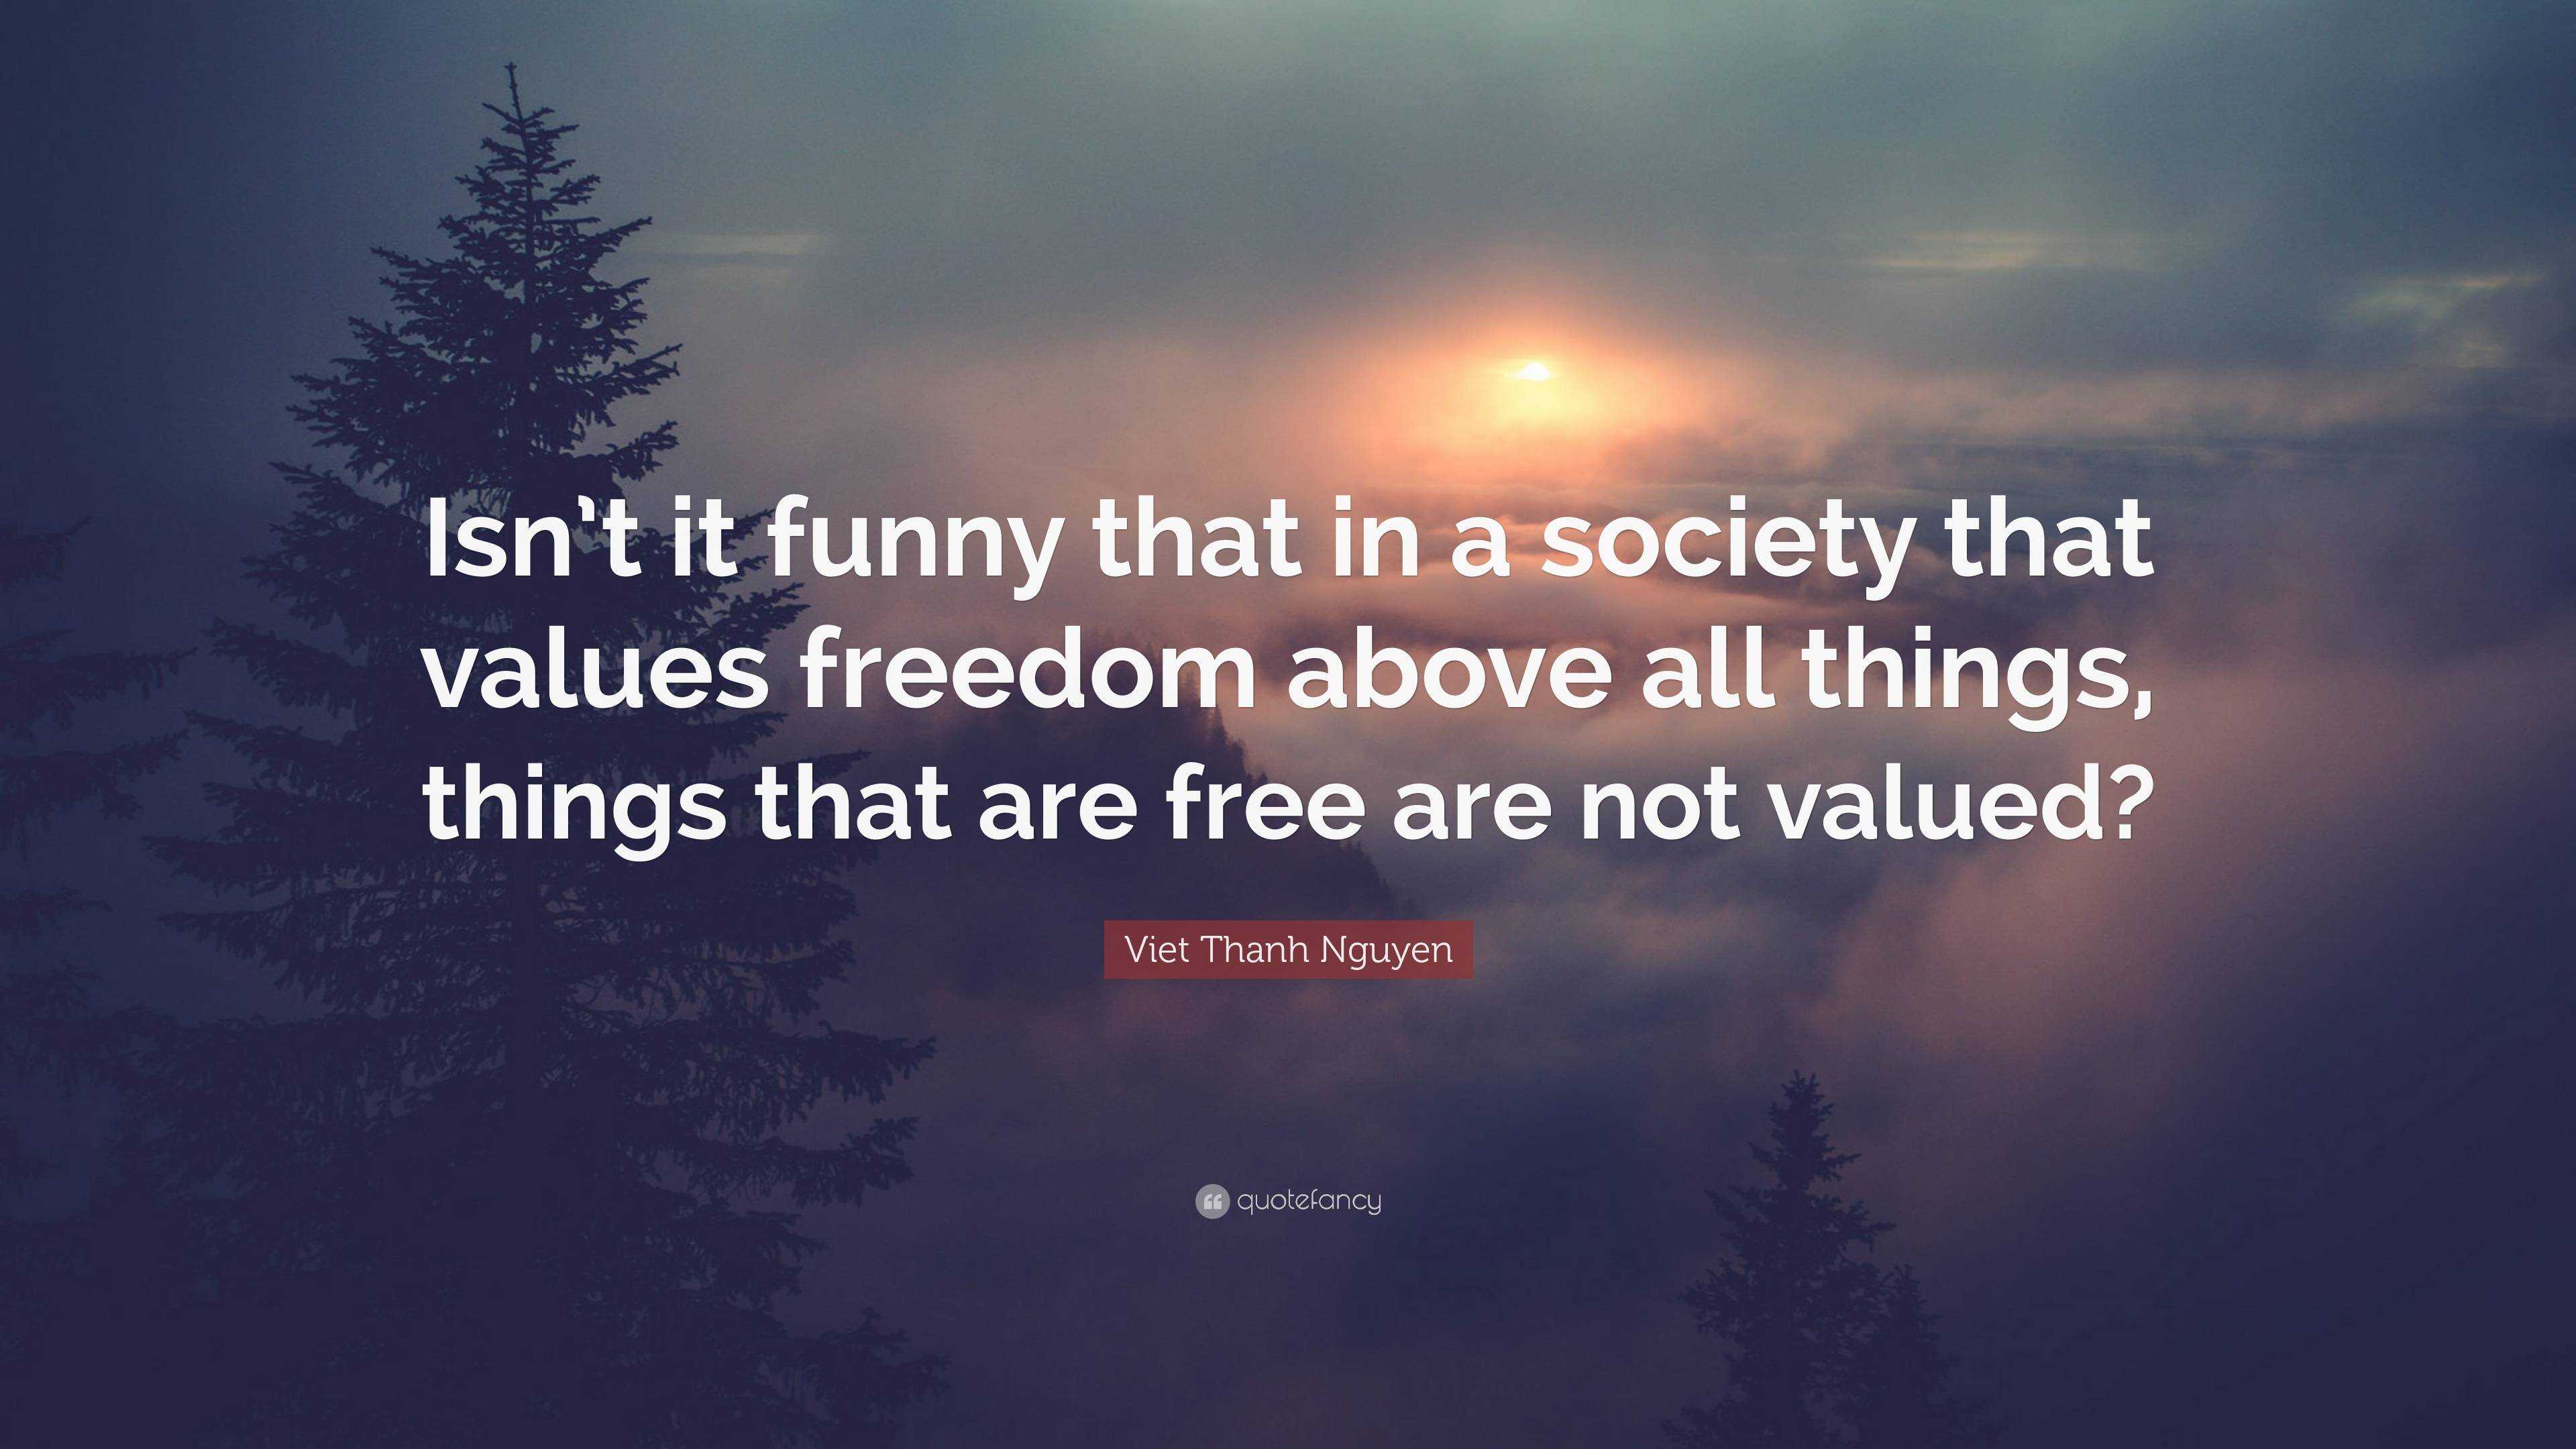 Viet Thanh Nguyen Quote: “Isn't it funny that in a society that values  freedom above